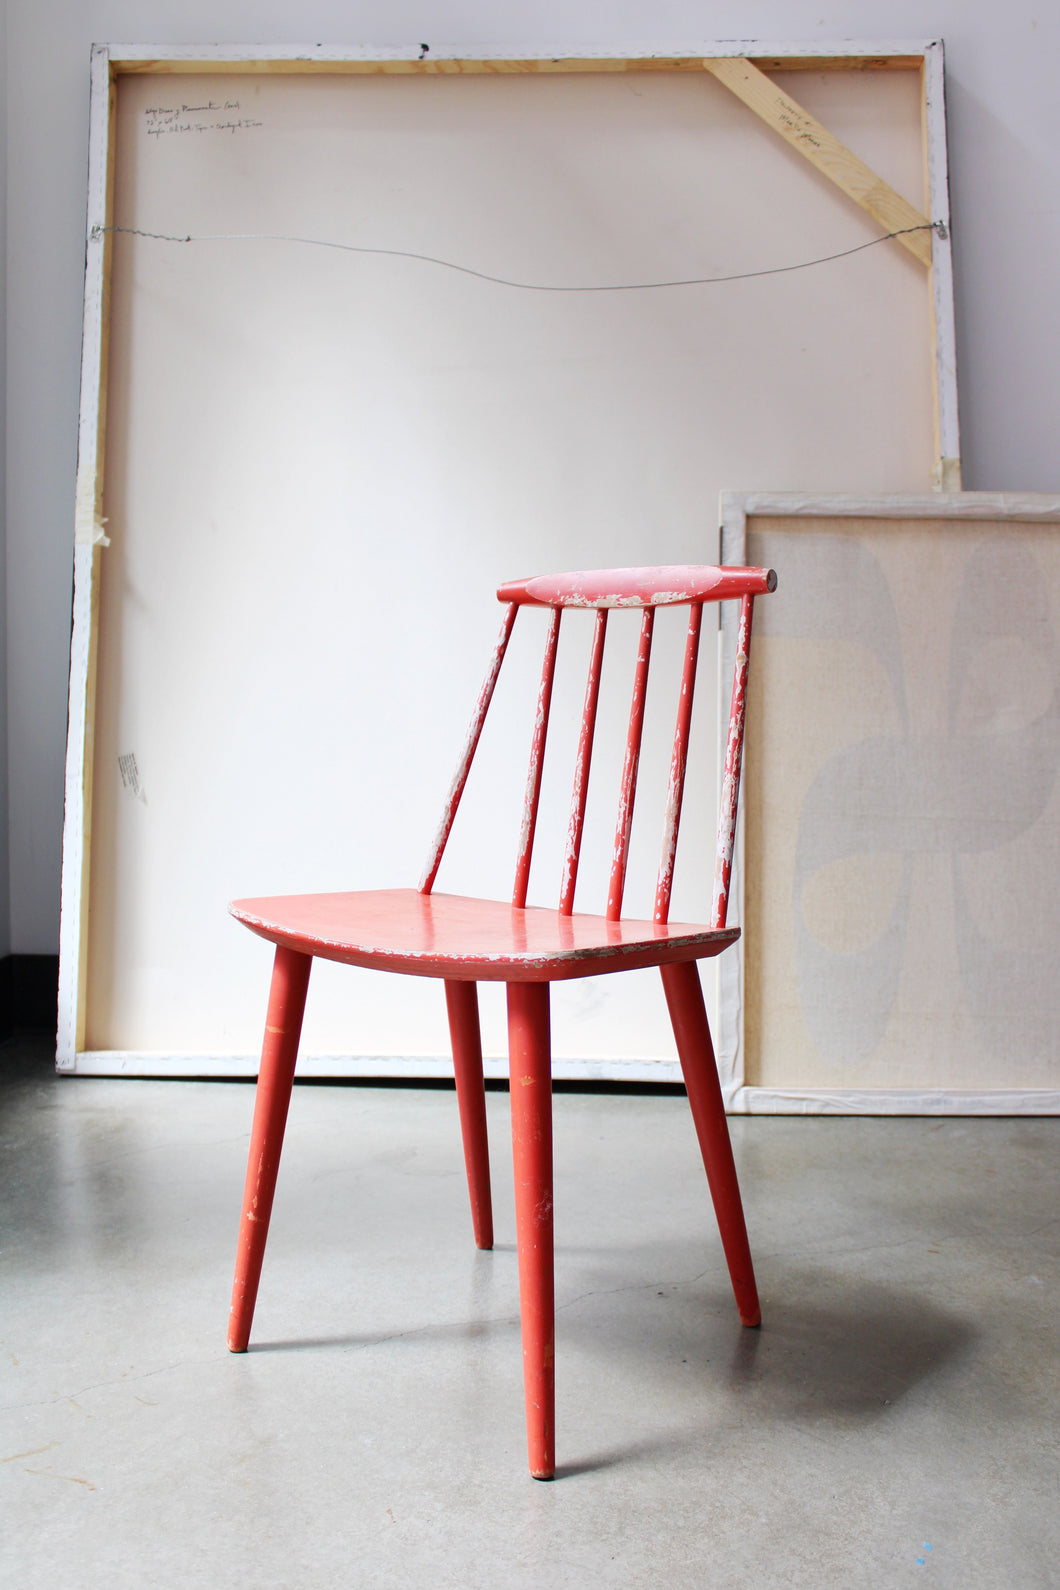 Spindle Back Chair By Folke Palsson